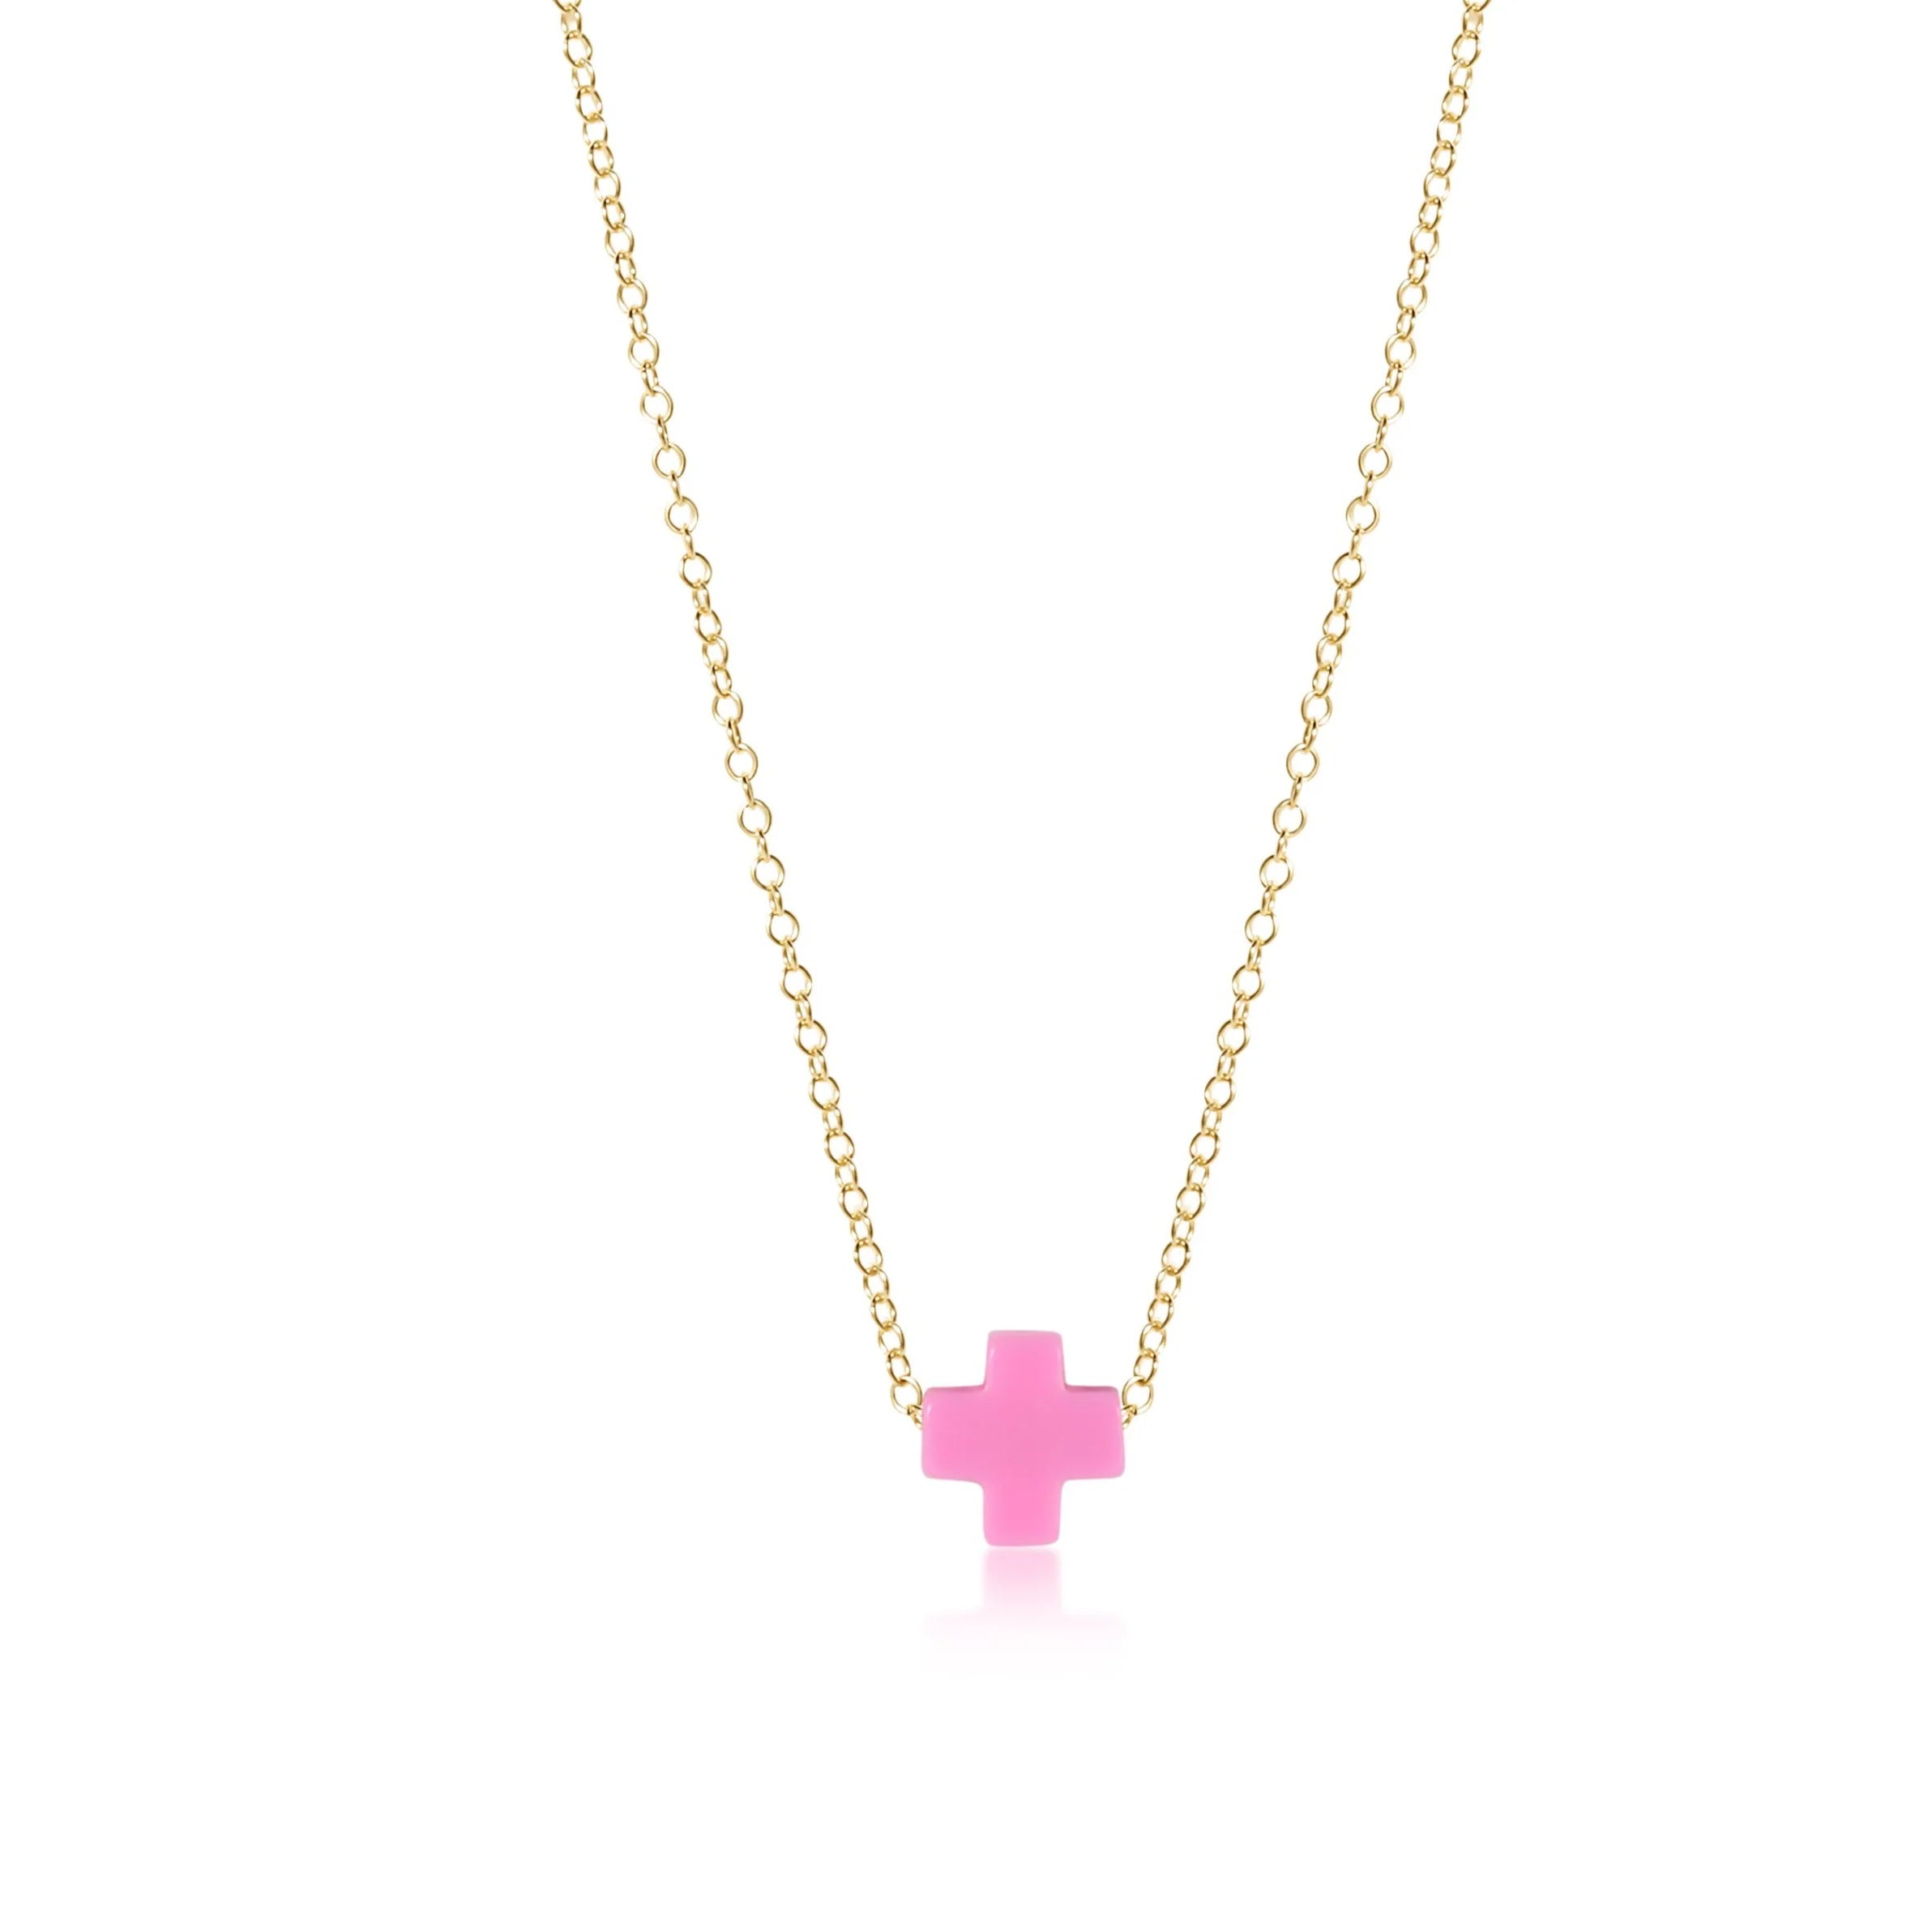 Pink Cross on Gold Chain by E-Newton